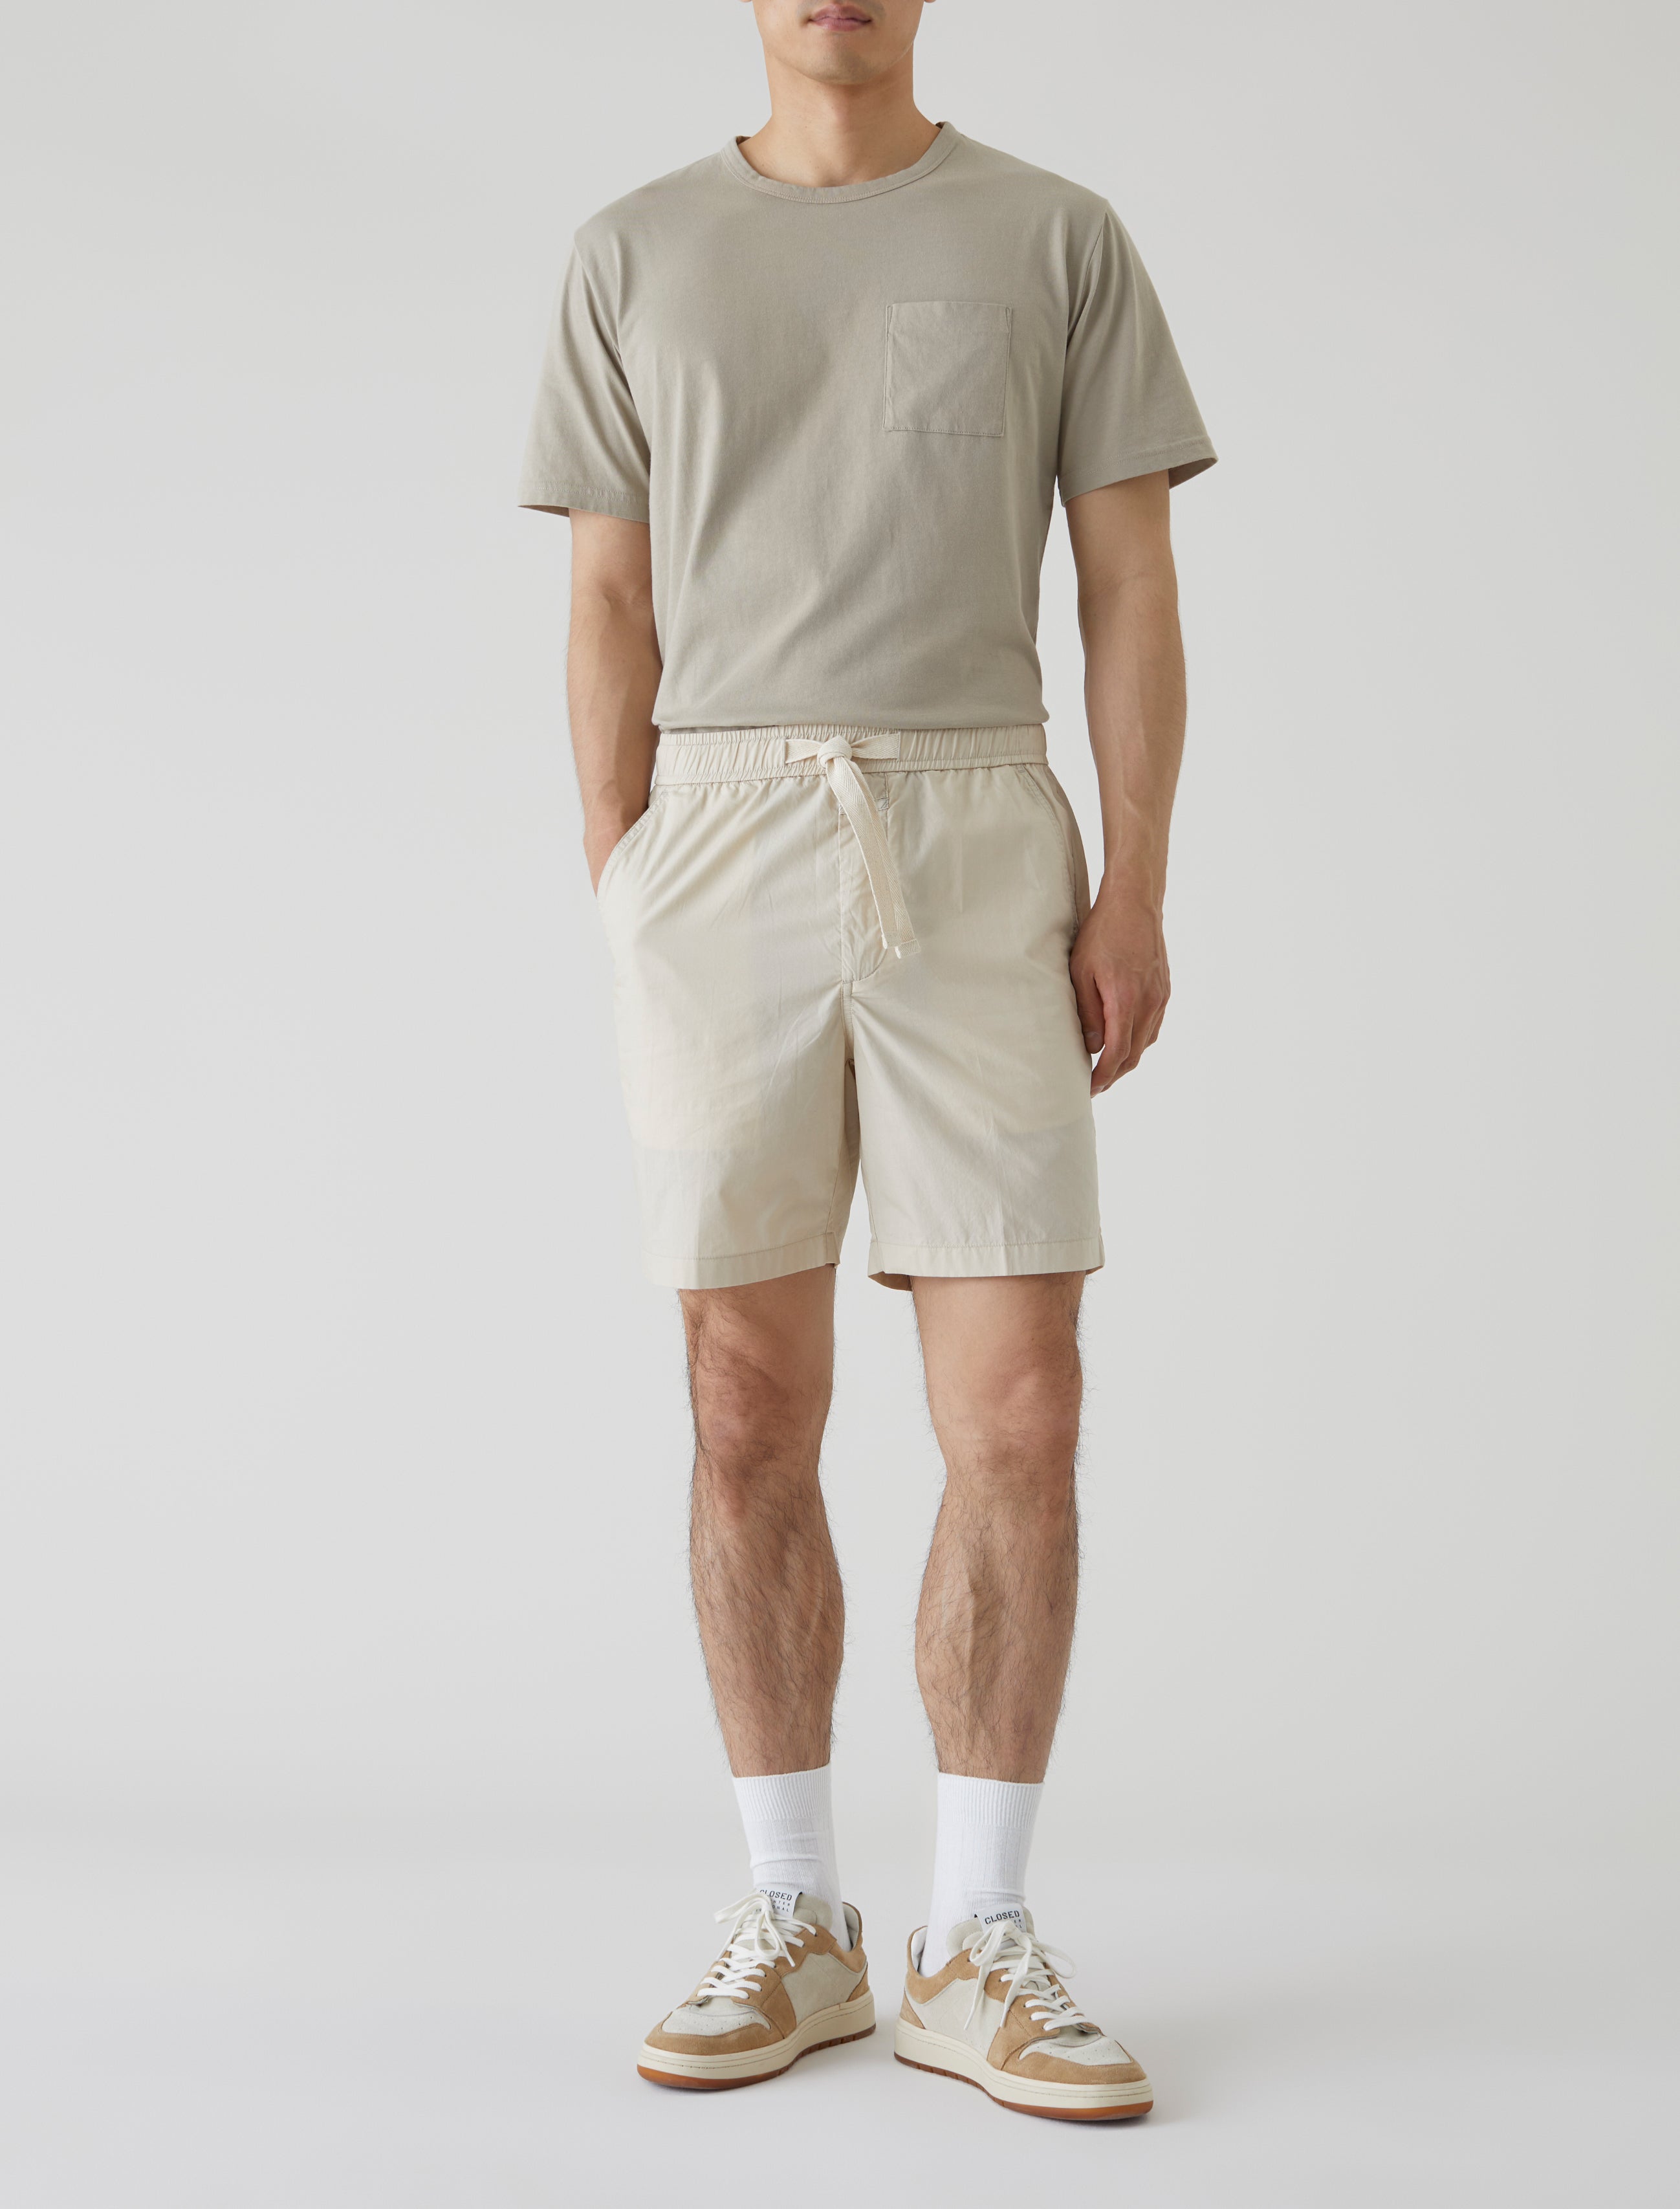 CLOSED-OUTLET-SALE-DRAWSTRING-SHORTS-Hosen-ARCHIVE-COLLECTION.jpg